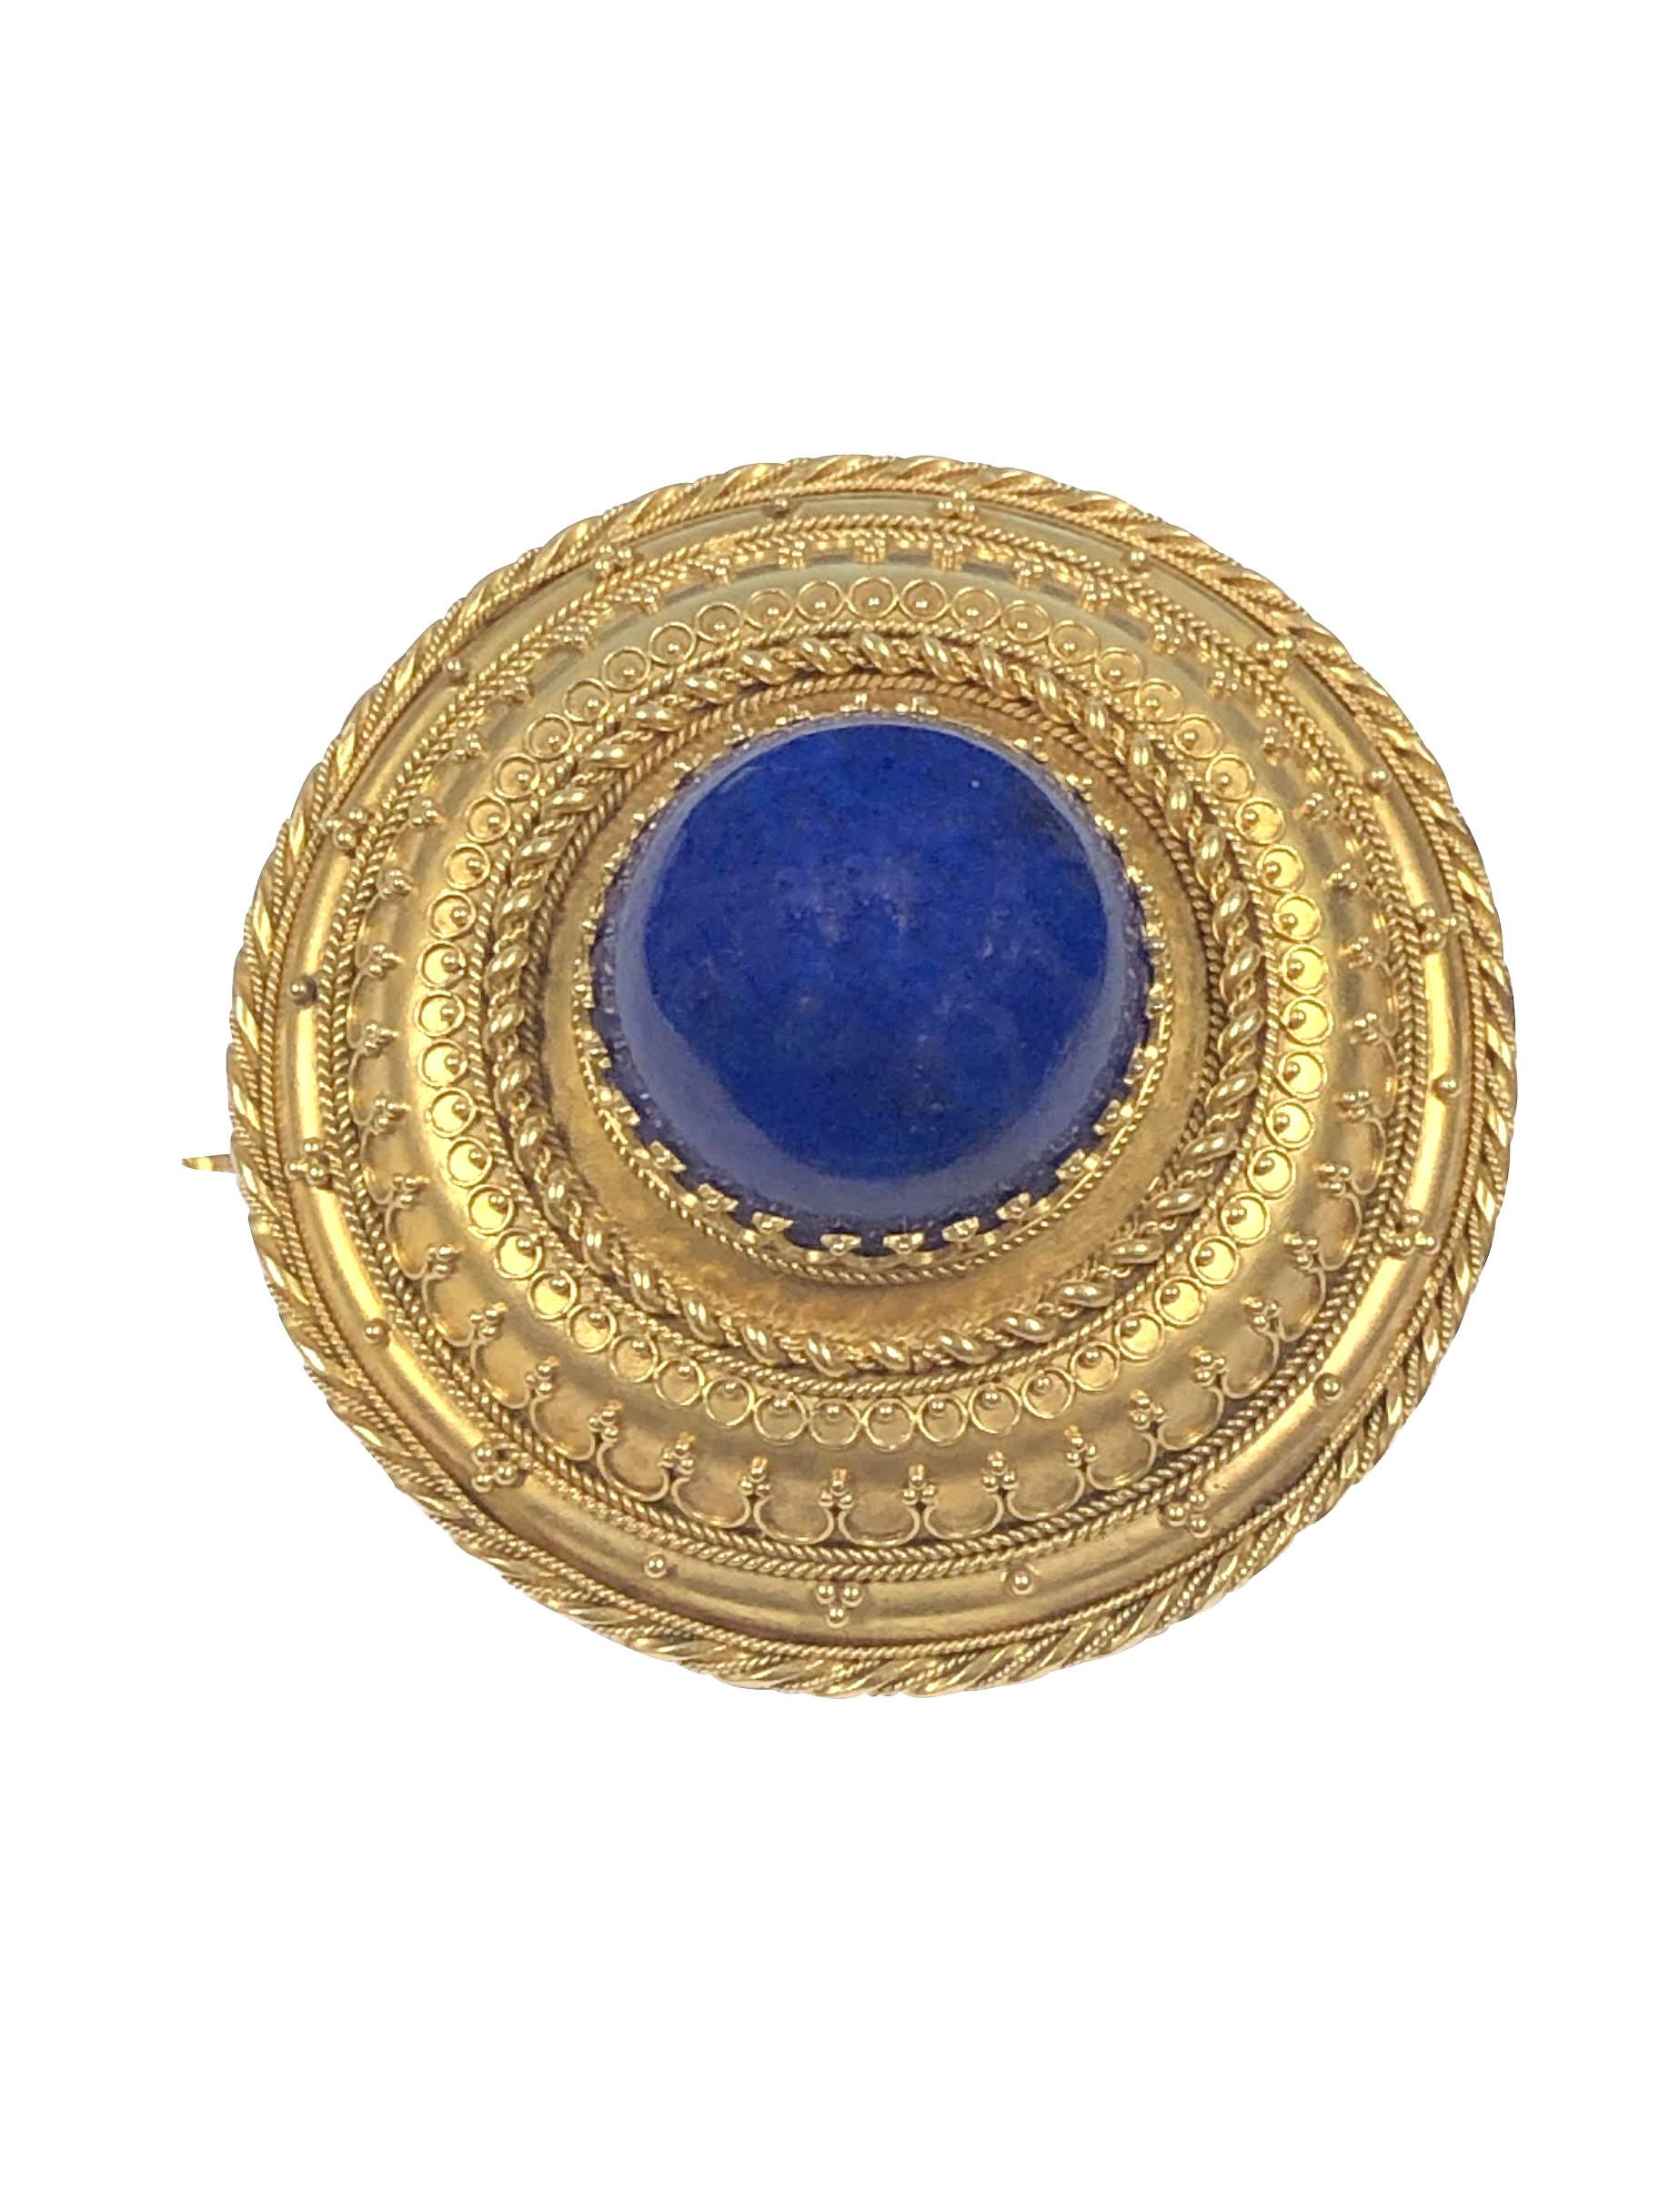 Circa 1880s Etruscan Revival Brooch, 14K Yellow Gold and measuring 1 3/4 inches in diameter and 3/4 inch in thickness. Centrally set with an 18 M.M. diameter domed Lapis Lazulli, The entire Brooch is finished in all intricate handmade Granulation